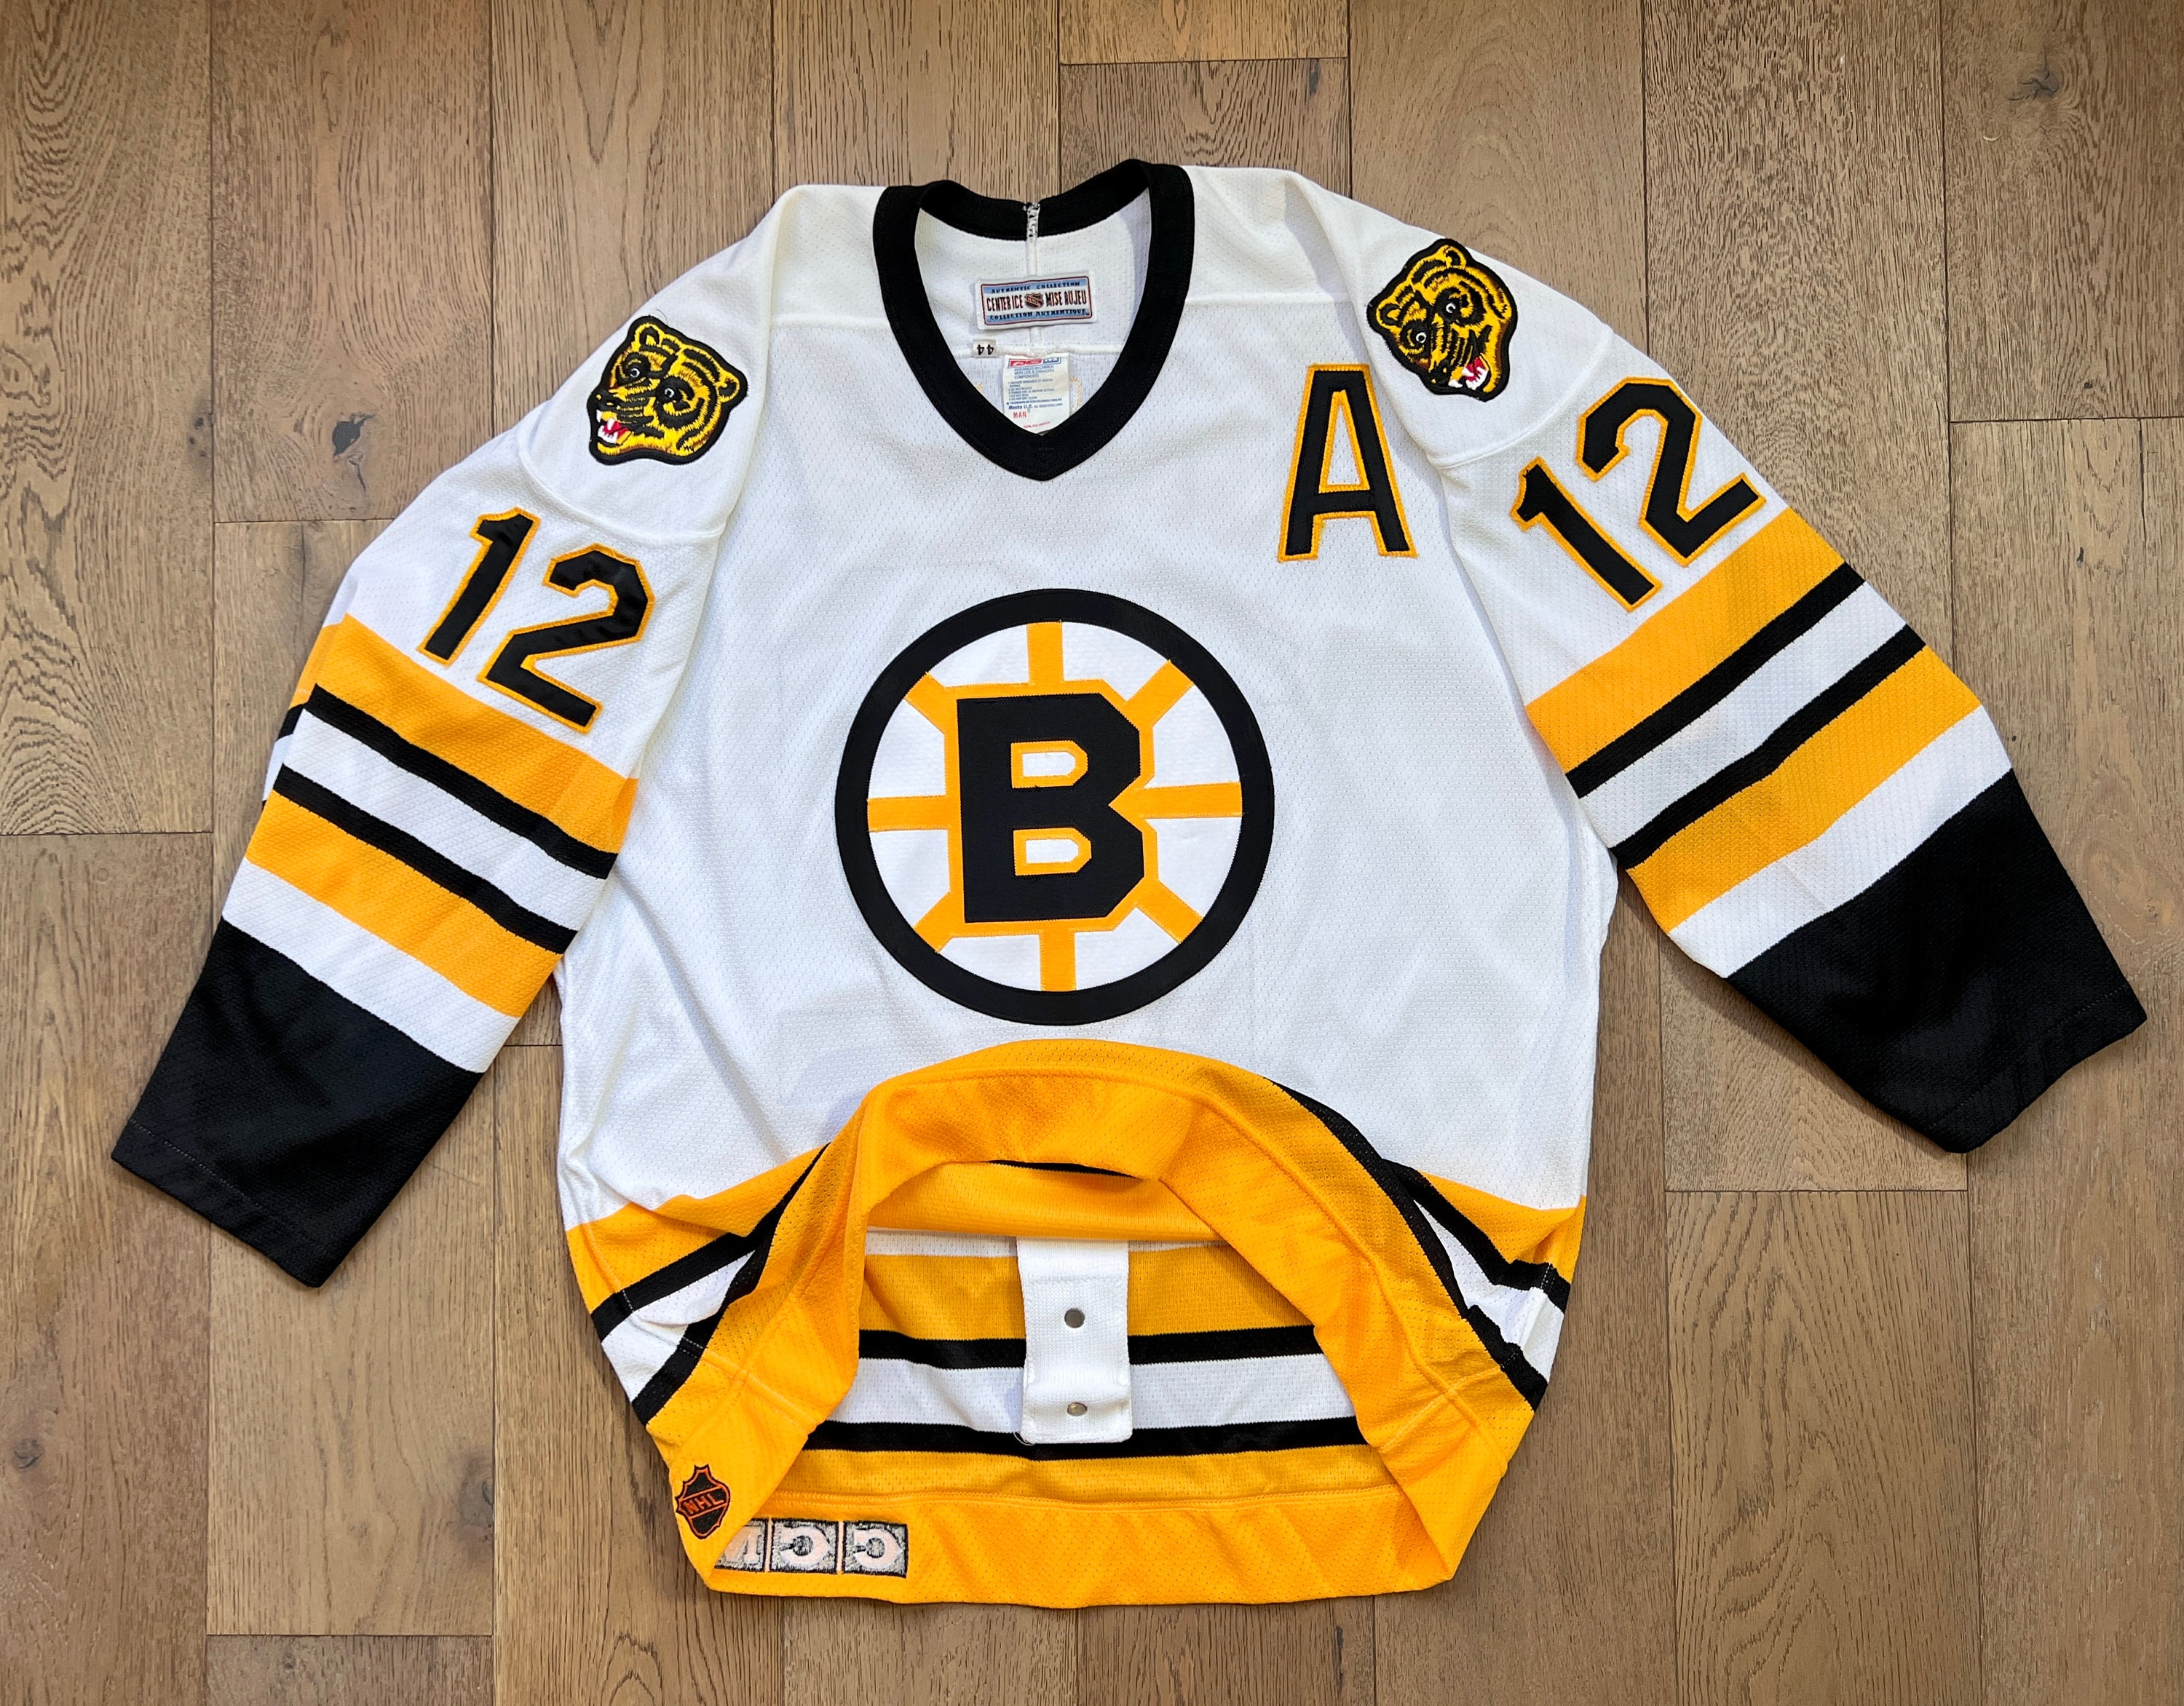 Boston Bruins 1940-41 jersey artwork, This is a highly deta…